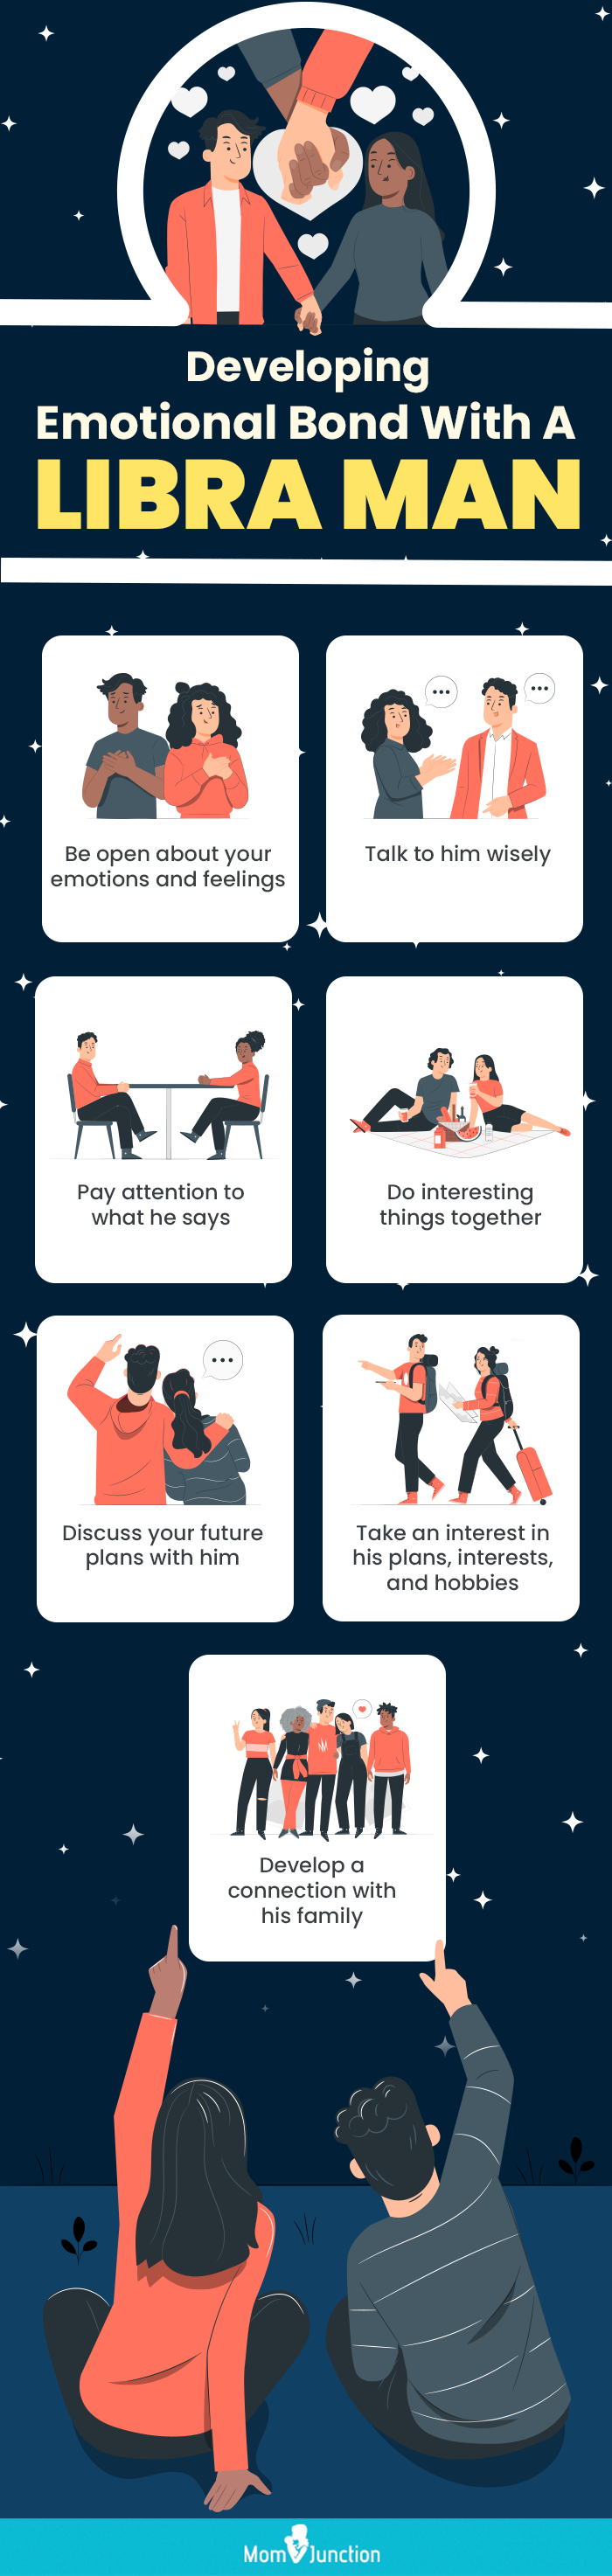 developing emotional bond with a libra man (infographic)